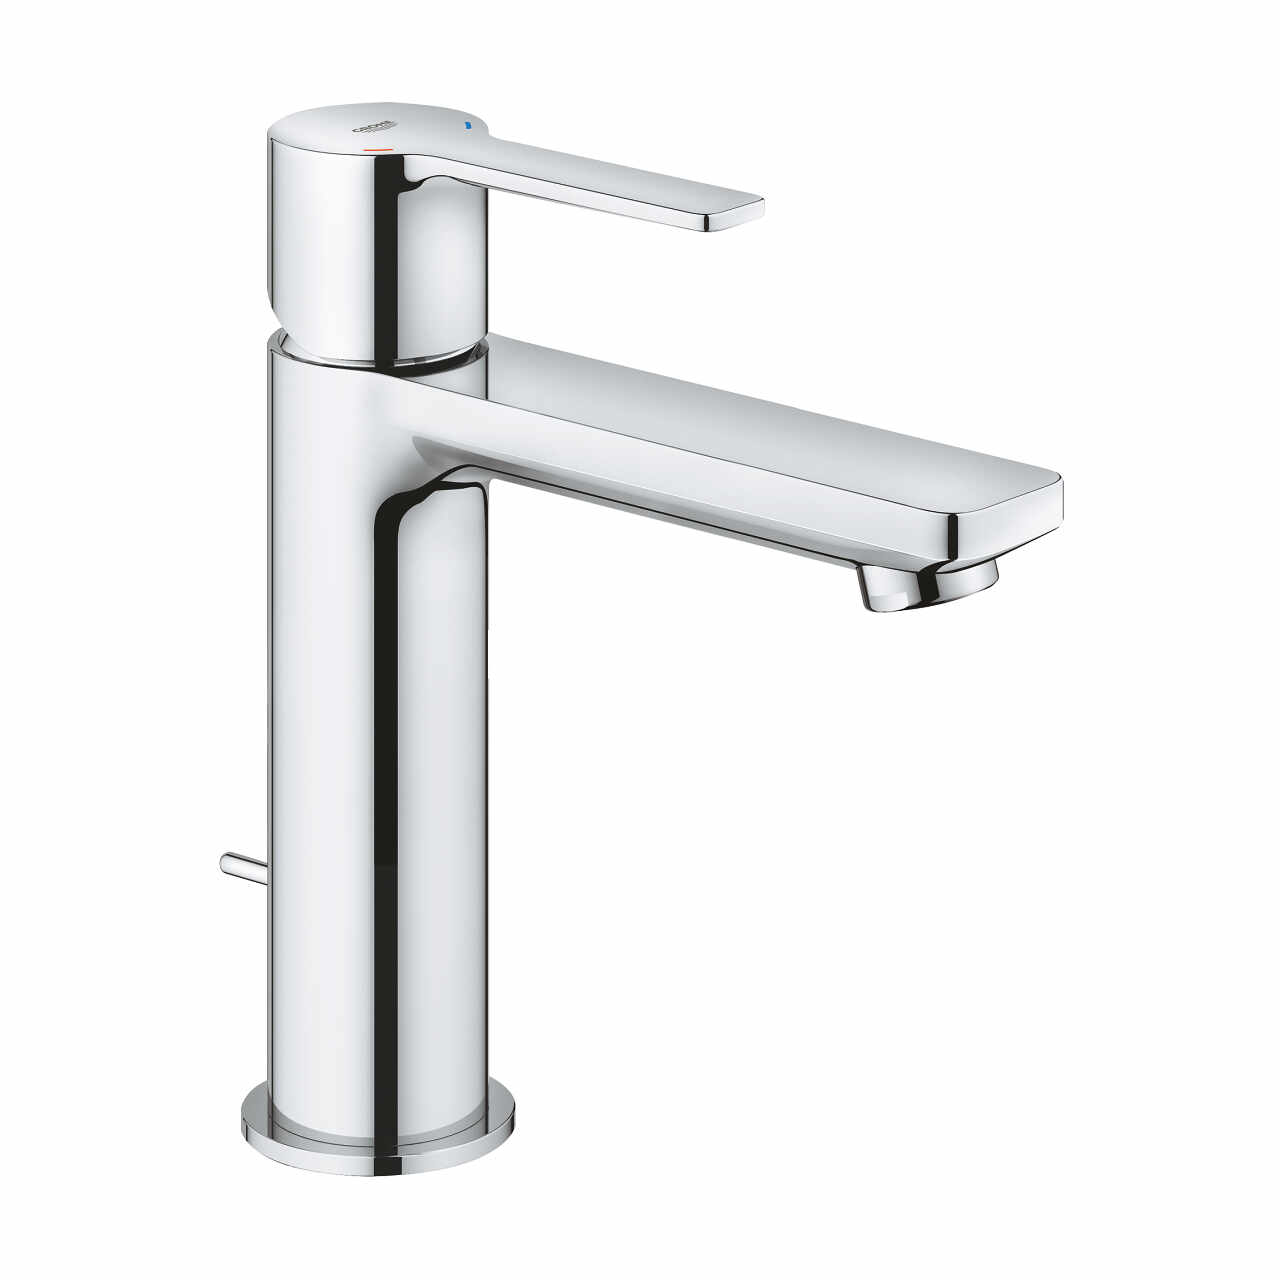 Baterie lavoar Grohe Lineare S ventil pop-up crom